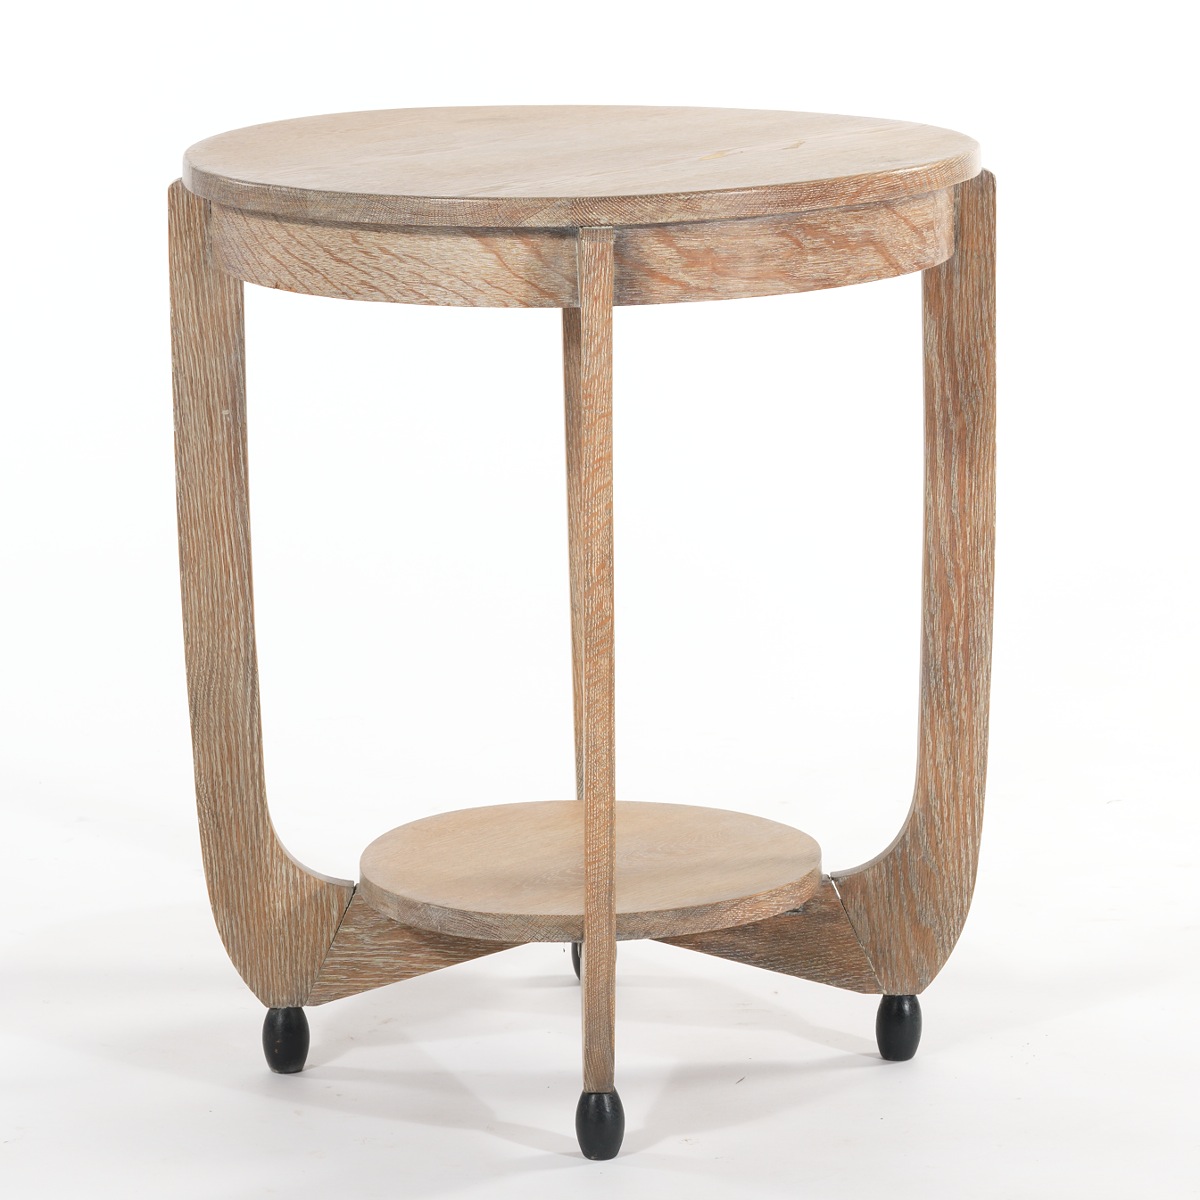 A Mid-Century Modern Accent Table, 03.27.14, Sold: $46